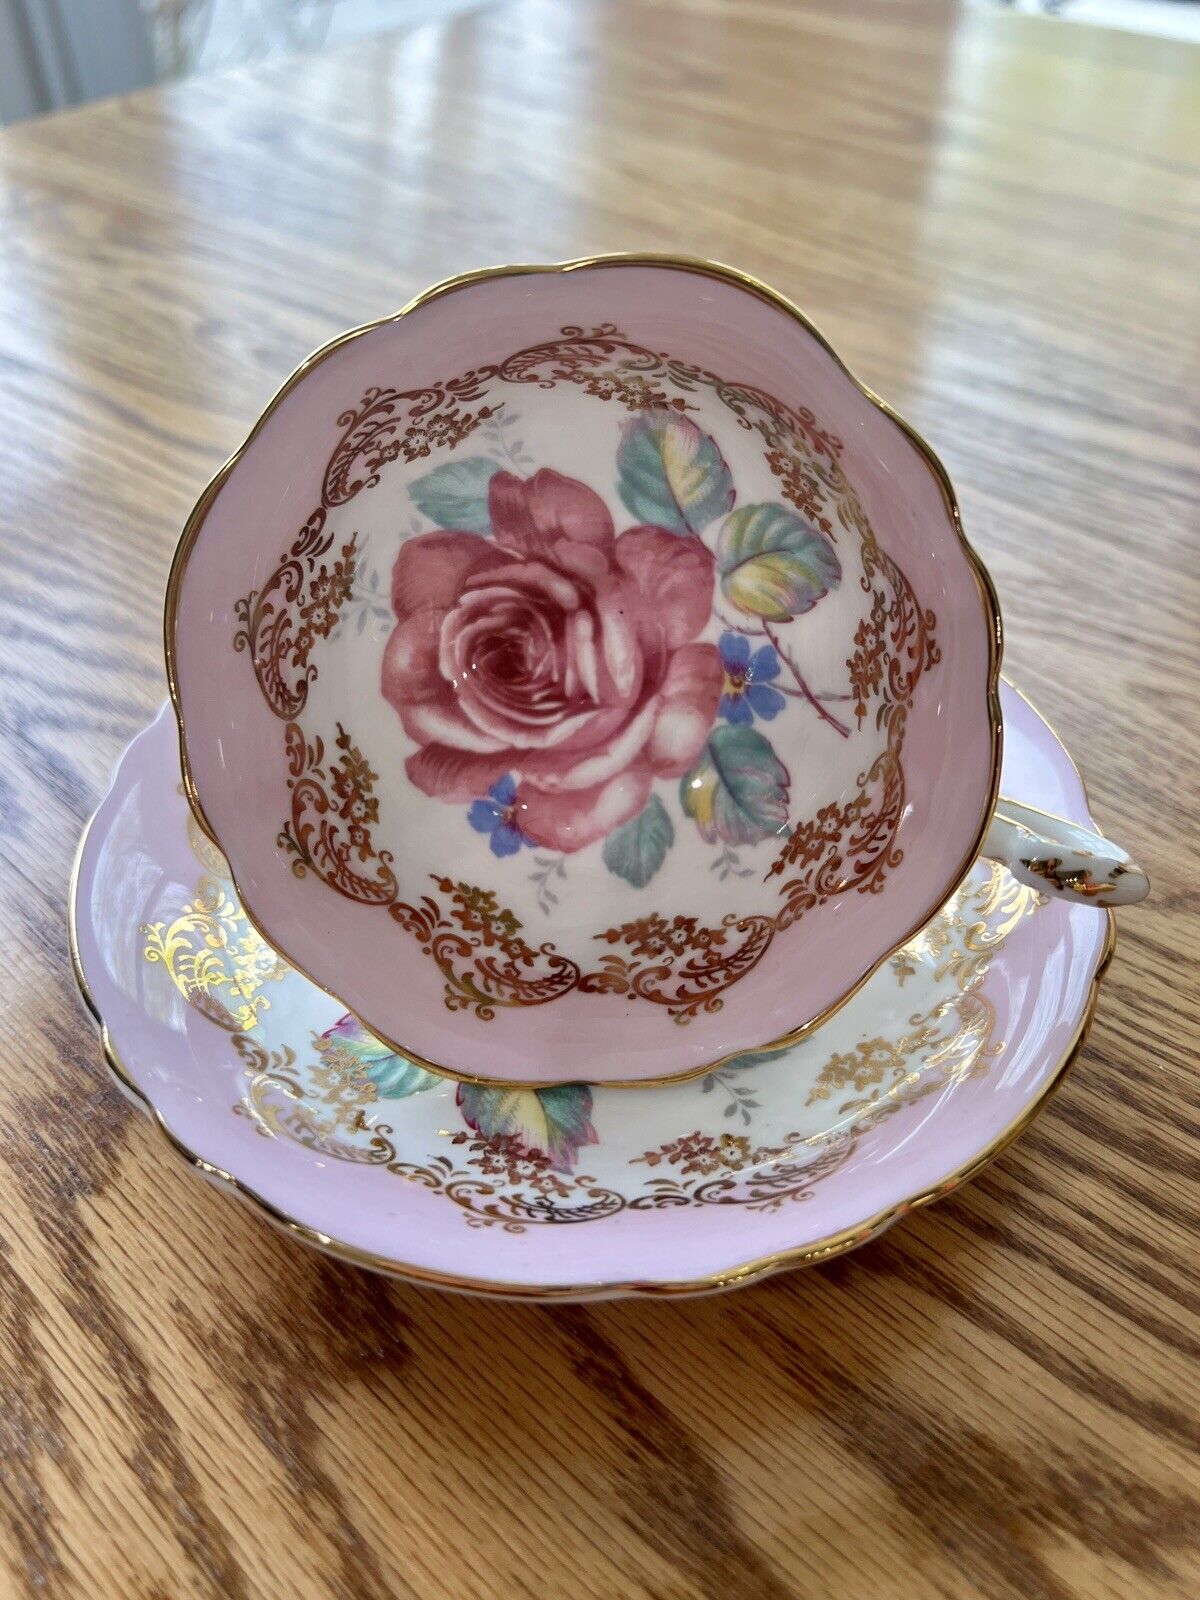 RARE Vintage Paragon Pink Cabbage Rose Teacup/Saucer. 1940s Great Condition